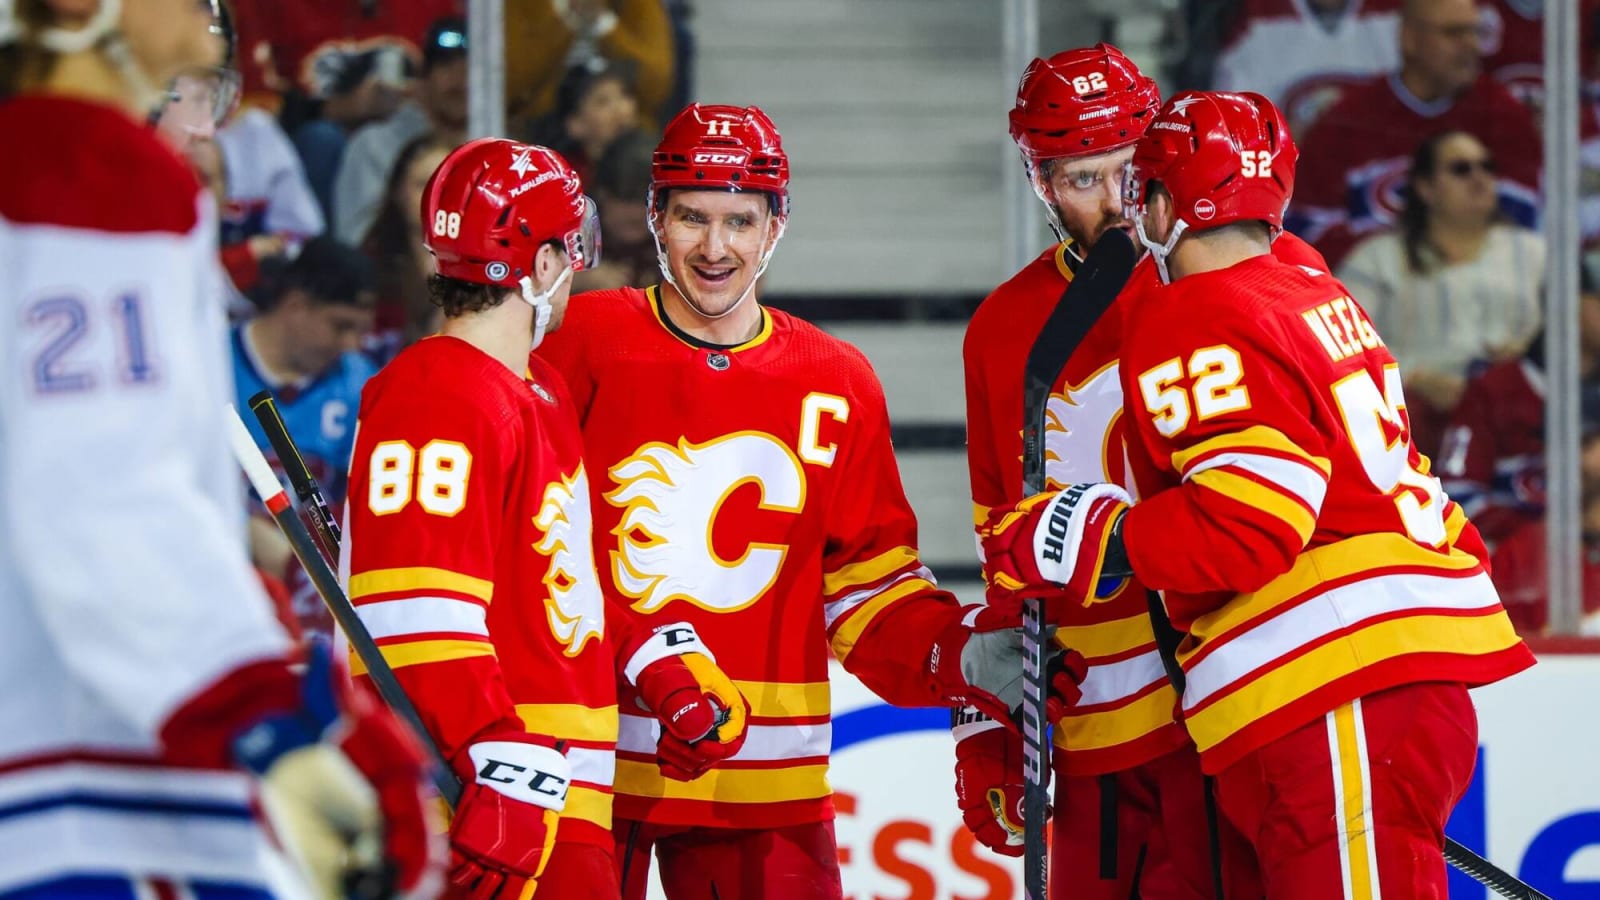 A look back on this Calgary Flames season and what to make of it